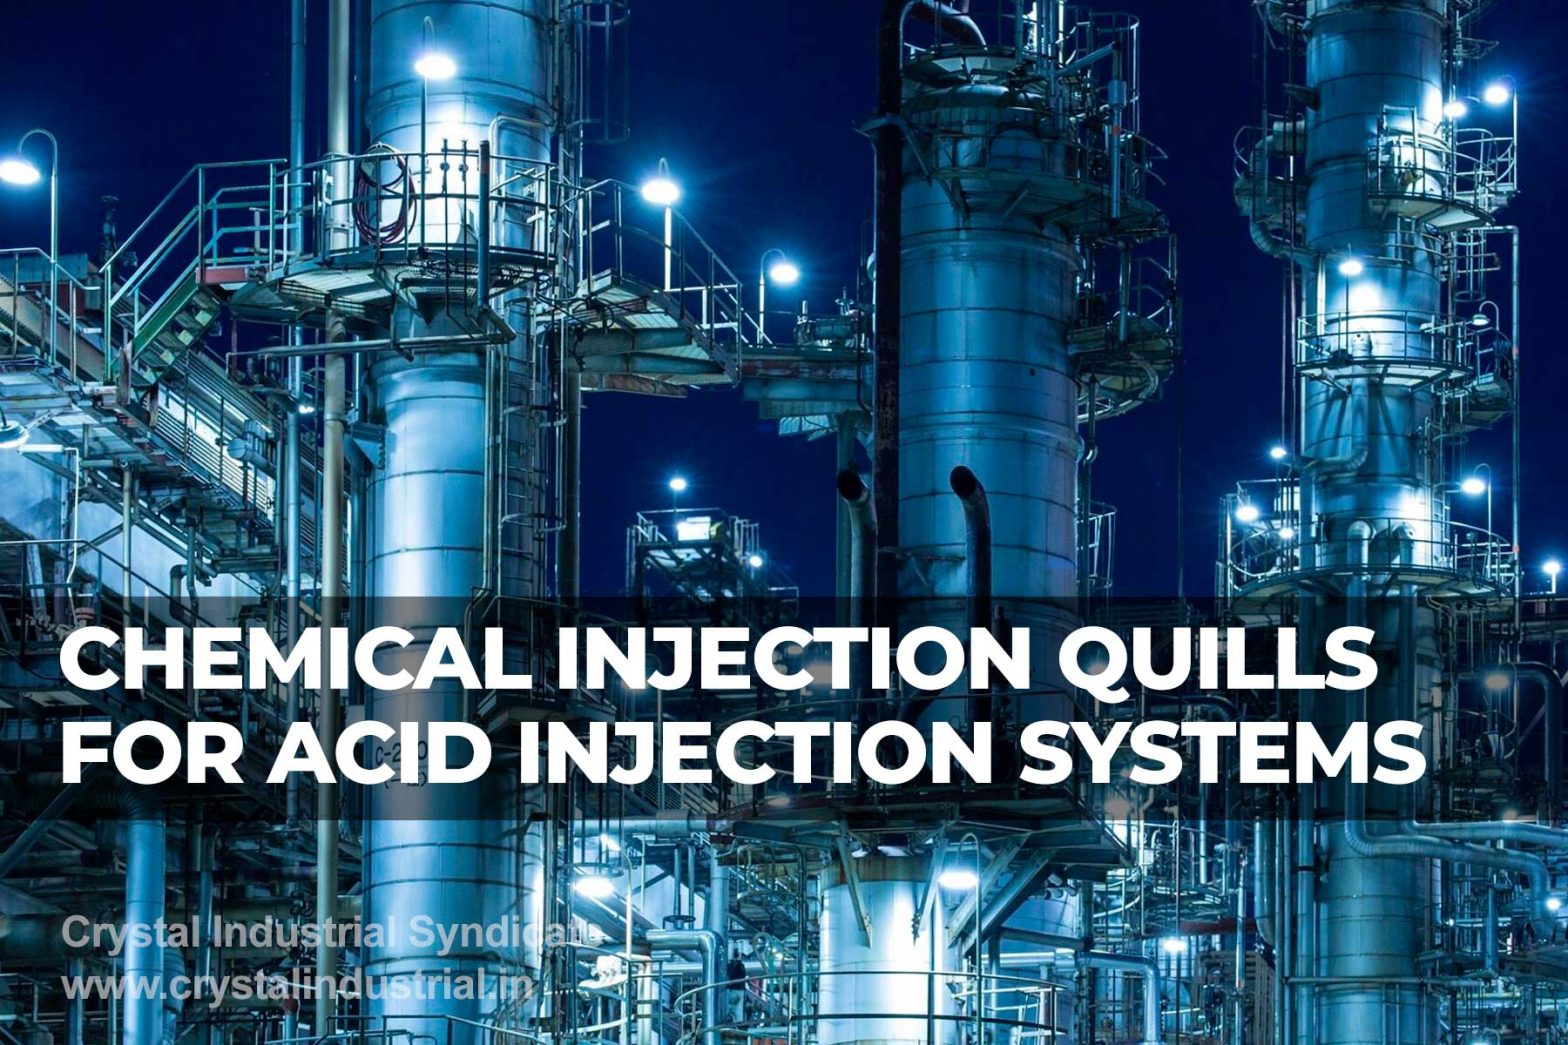 Industries that use chemical injection quills in acid injection systems